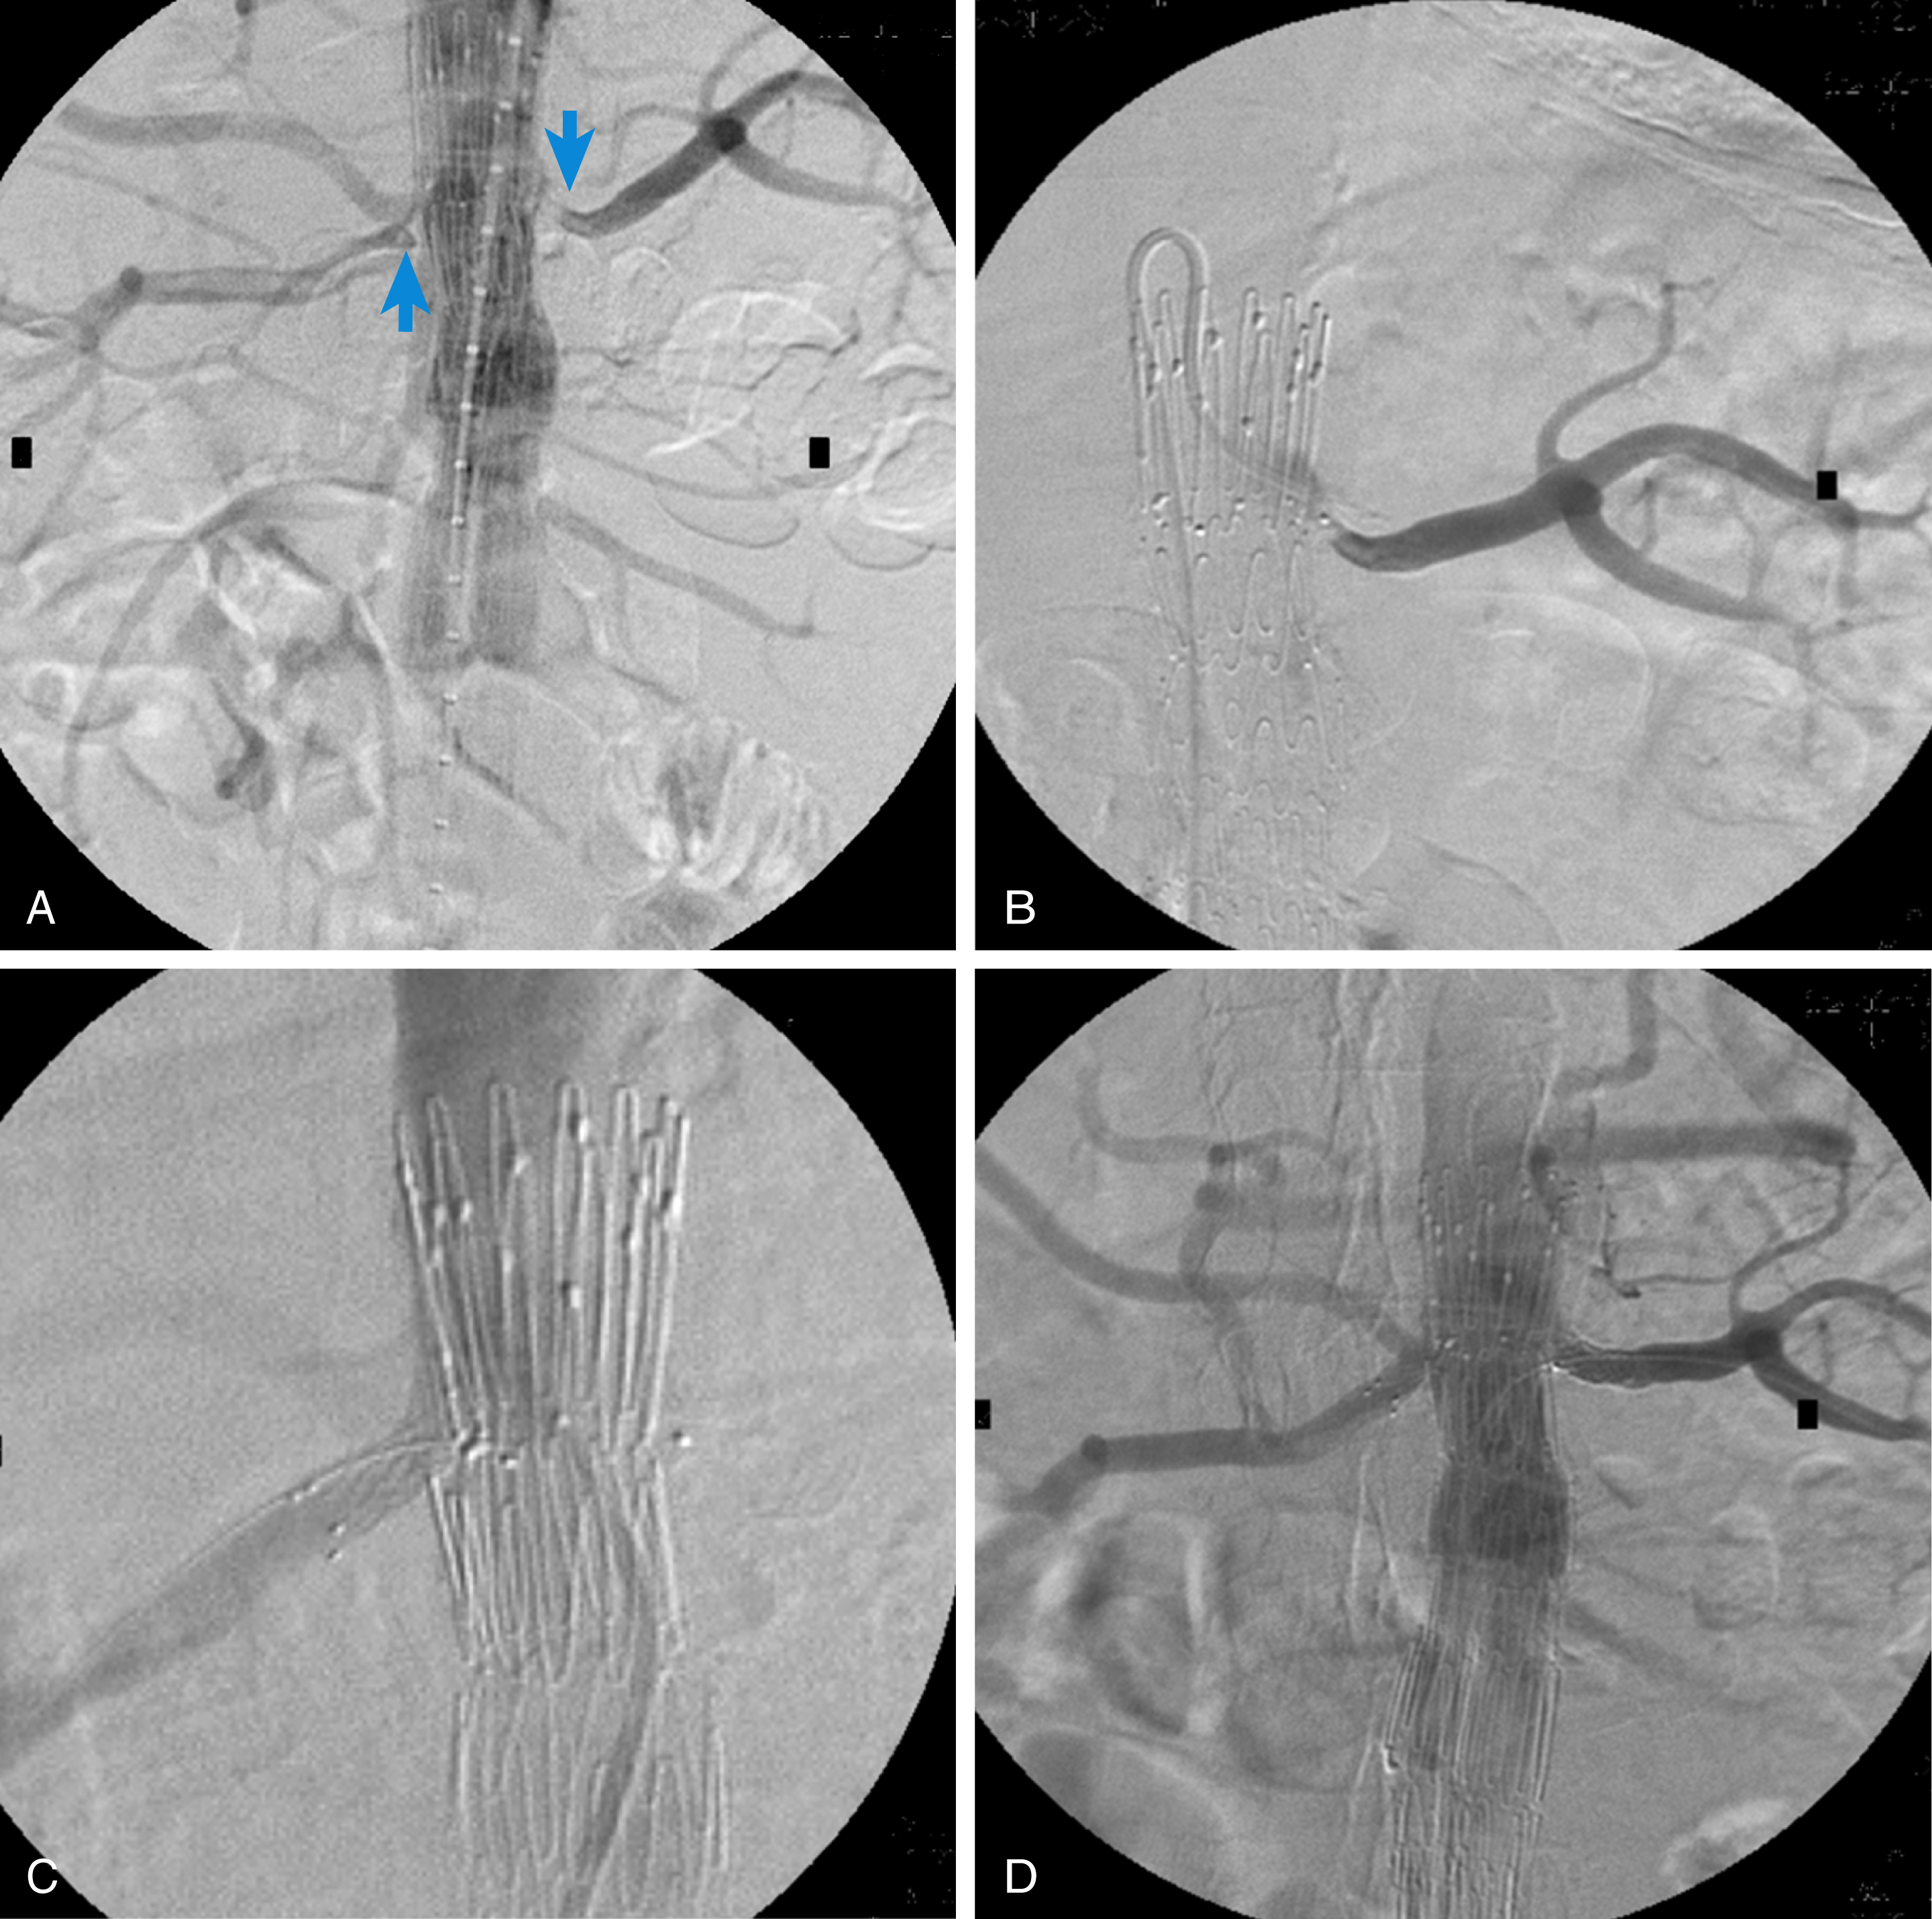 Fig. 31.1, Endovascular abdominal aneurysm repair with concomitant bilateral renal artery stenting due to flow impairment. (A) Final digital subtraction angiograph demonstrating flow impairment of both renal arteries ( arrows ). Immediate catheterization and stenting of the left (B) and subsequently the right (C) renal artery. (D) Final result demonstrating patency of both renal arteries.